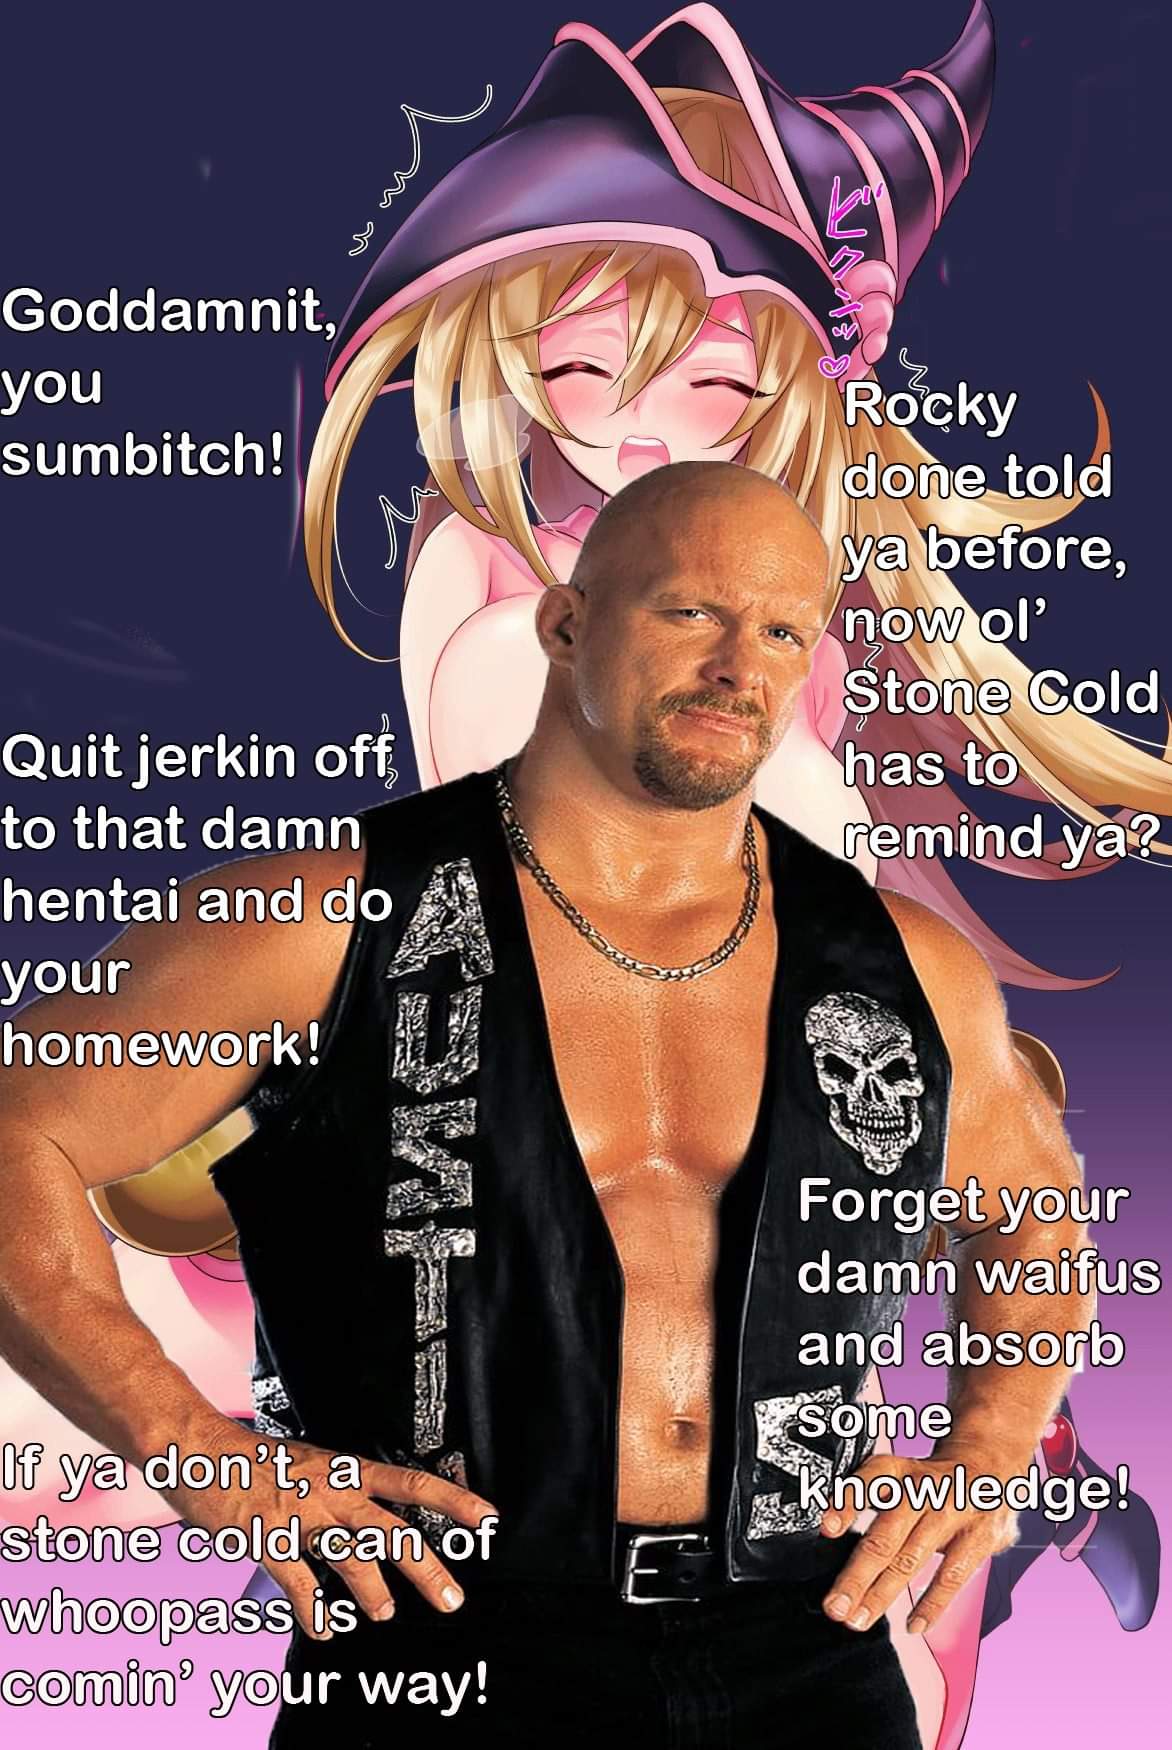 magazine - Goddamnit, you sumbitch! Rocky done told ya before, now ol Stone Cold has to remind ya? Quit jerkin off to that damn hentai and do your homework! Forget your damn waifus and absorb some knowledge! If ya don't, a stone cold can of whoopass is co